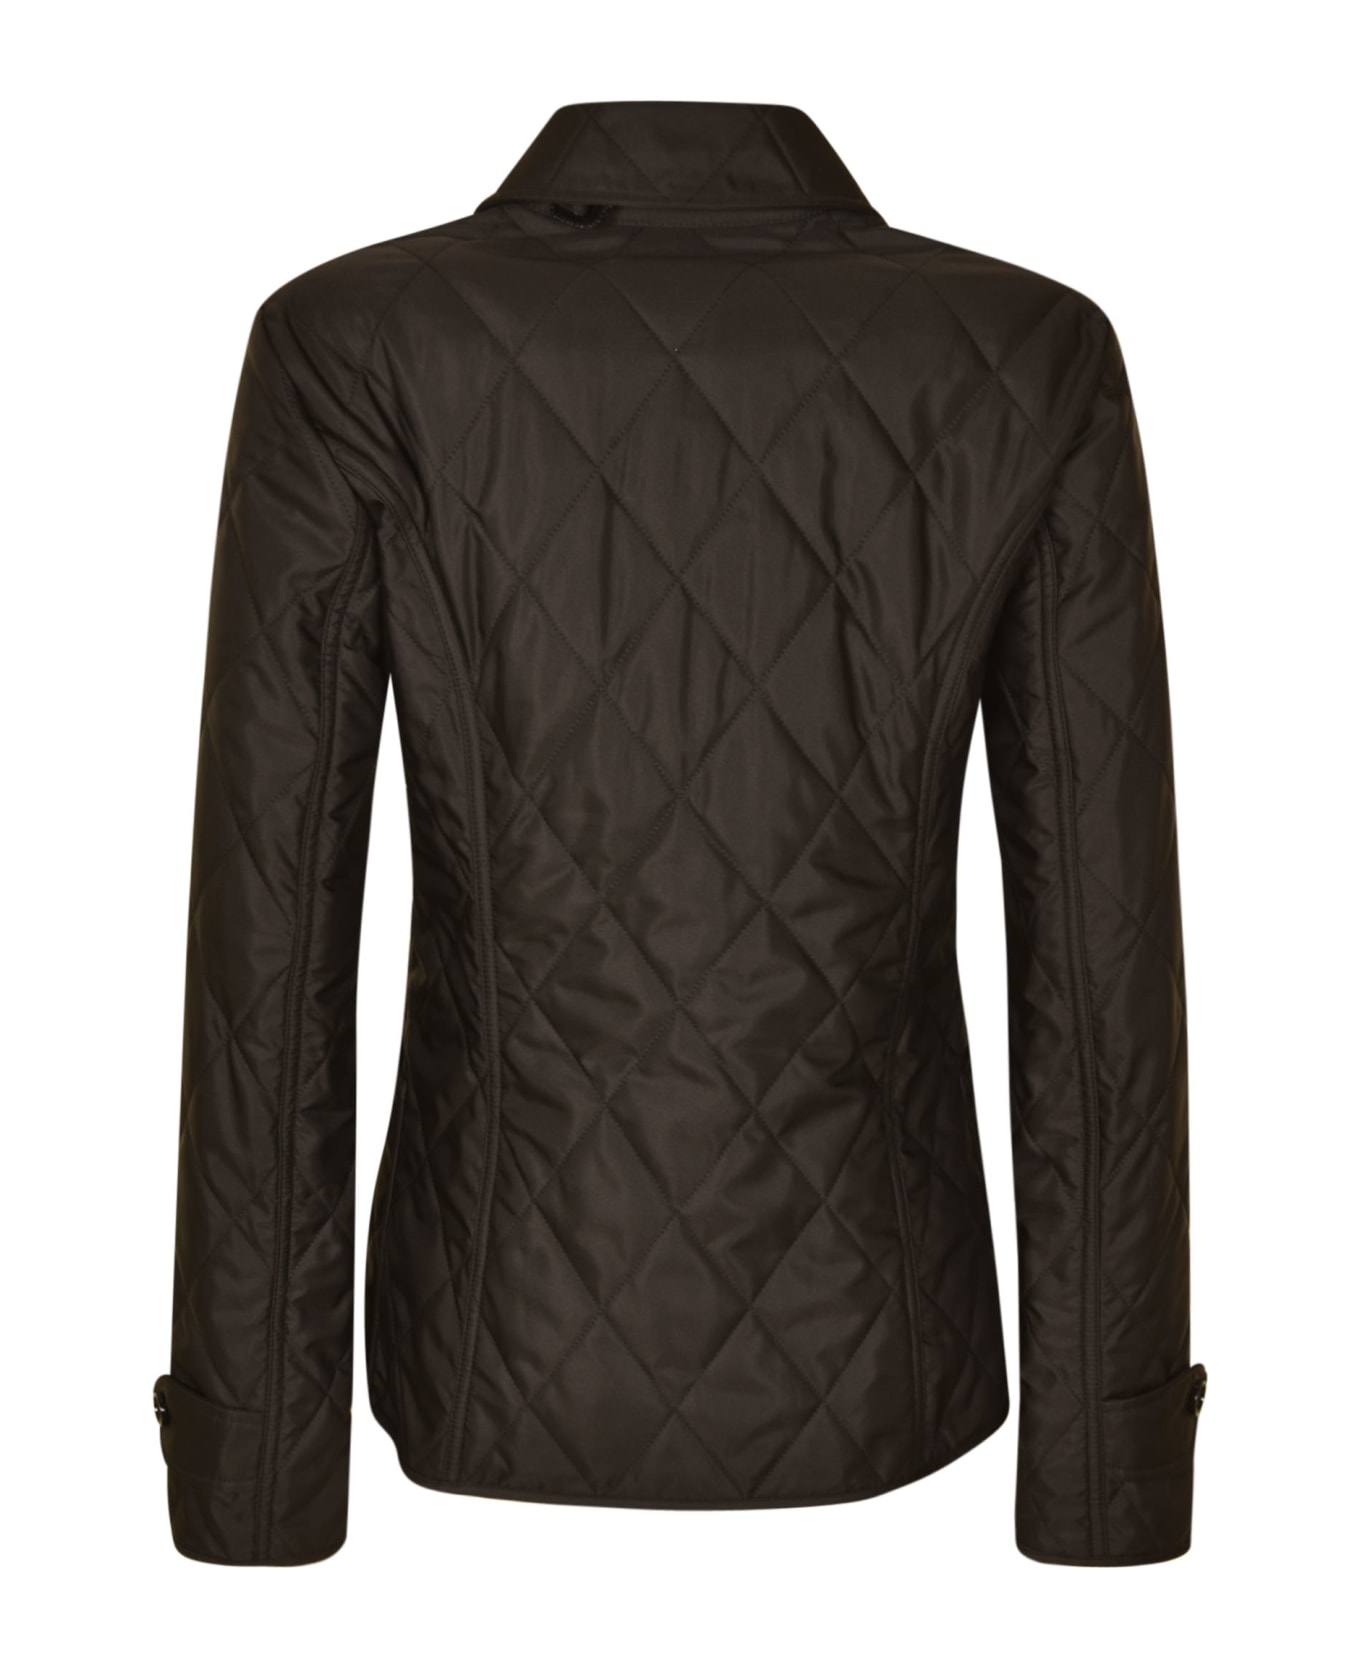 Burberry Quilted Buttoned Jacket - Black ダウンジャケット